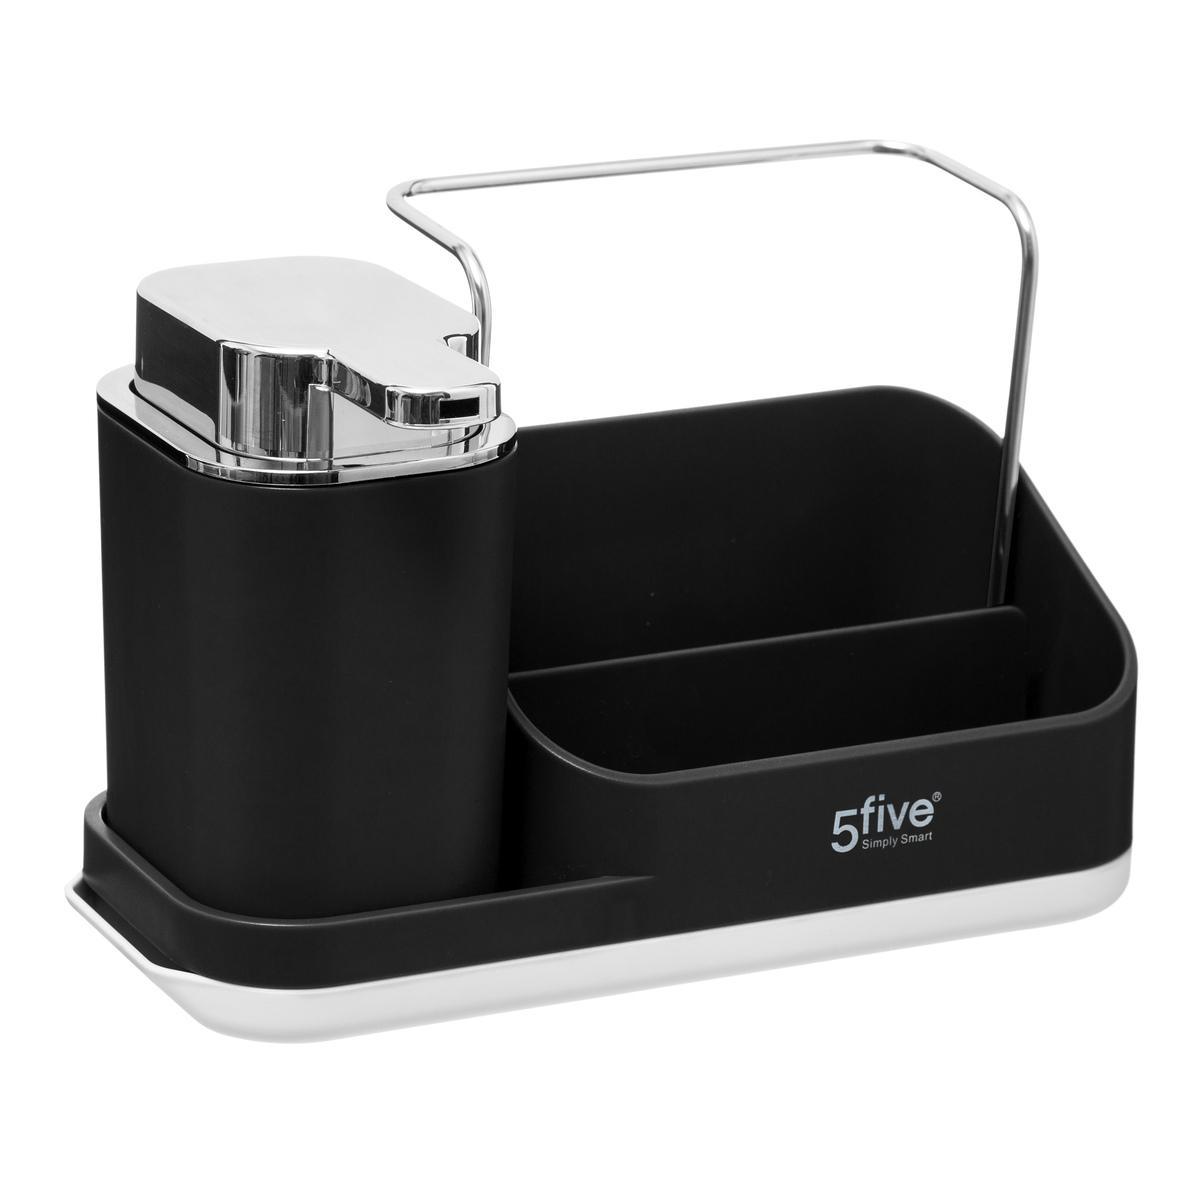 Black Square Cutlery Drainer by 5Five - Simply Smart